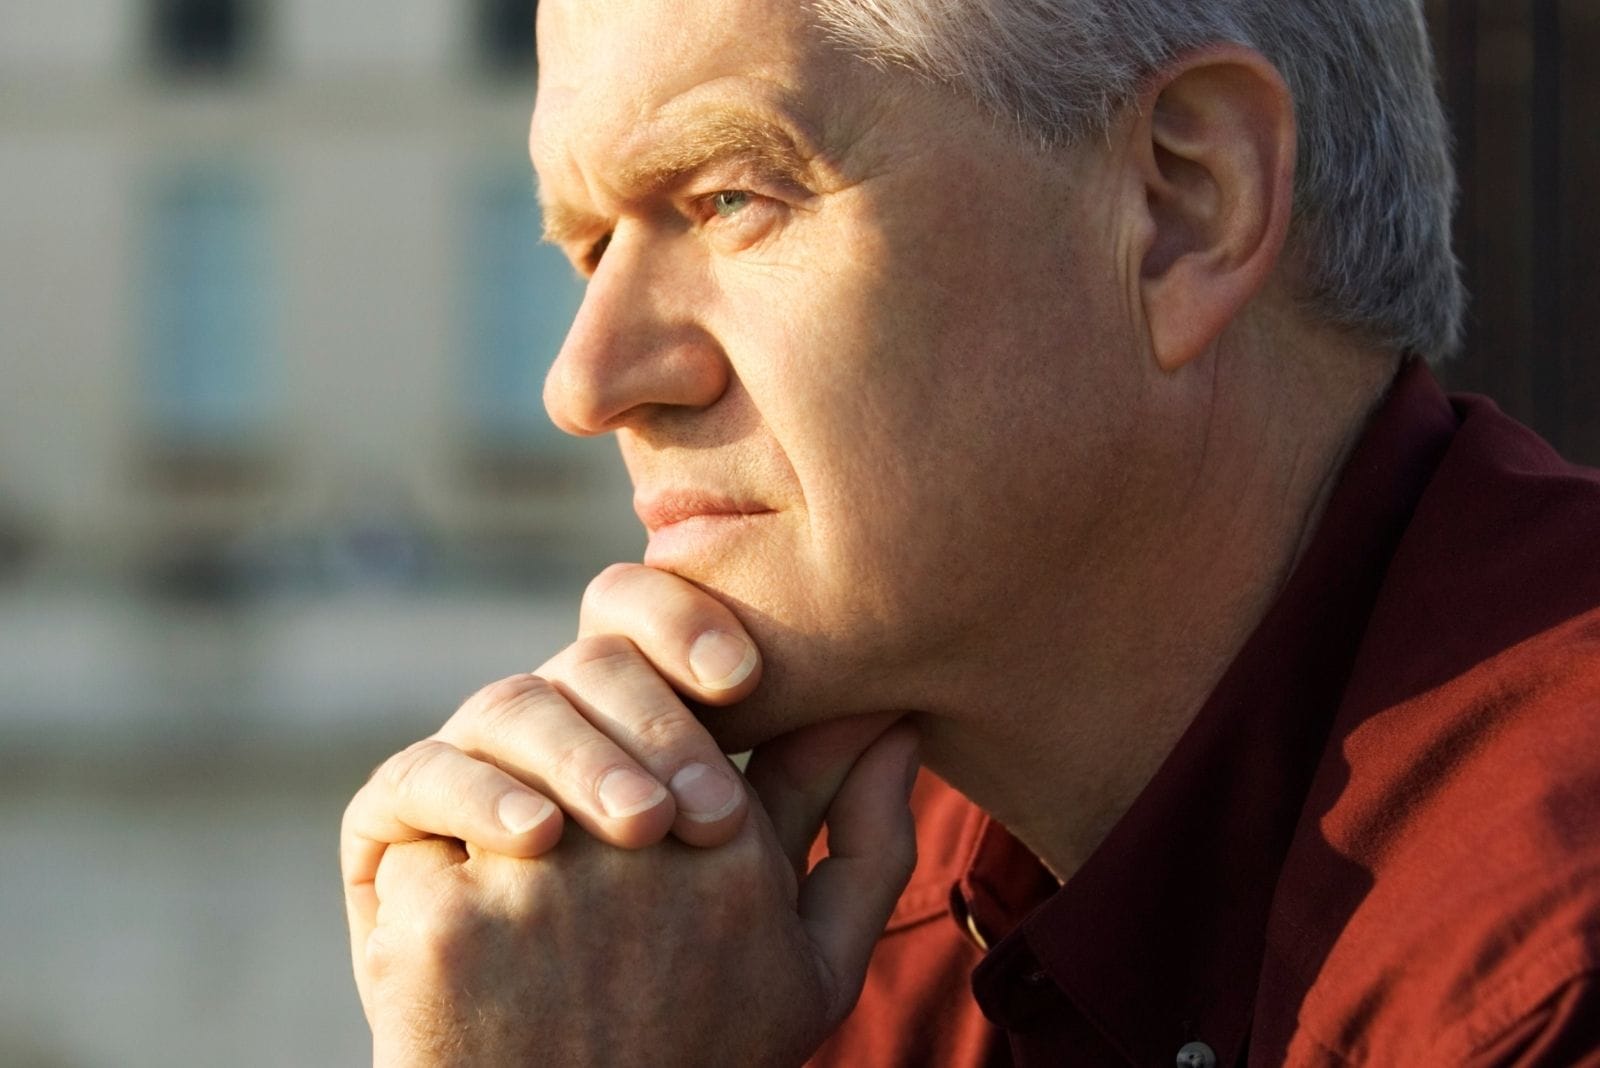 pensive mature man sitting outdoors with hands on his chin